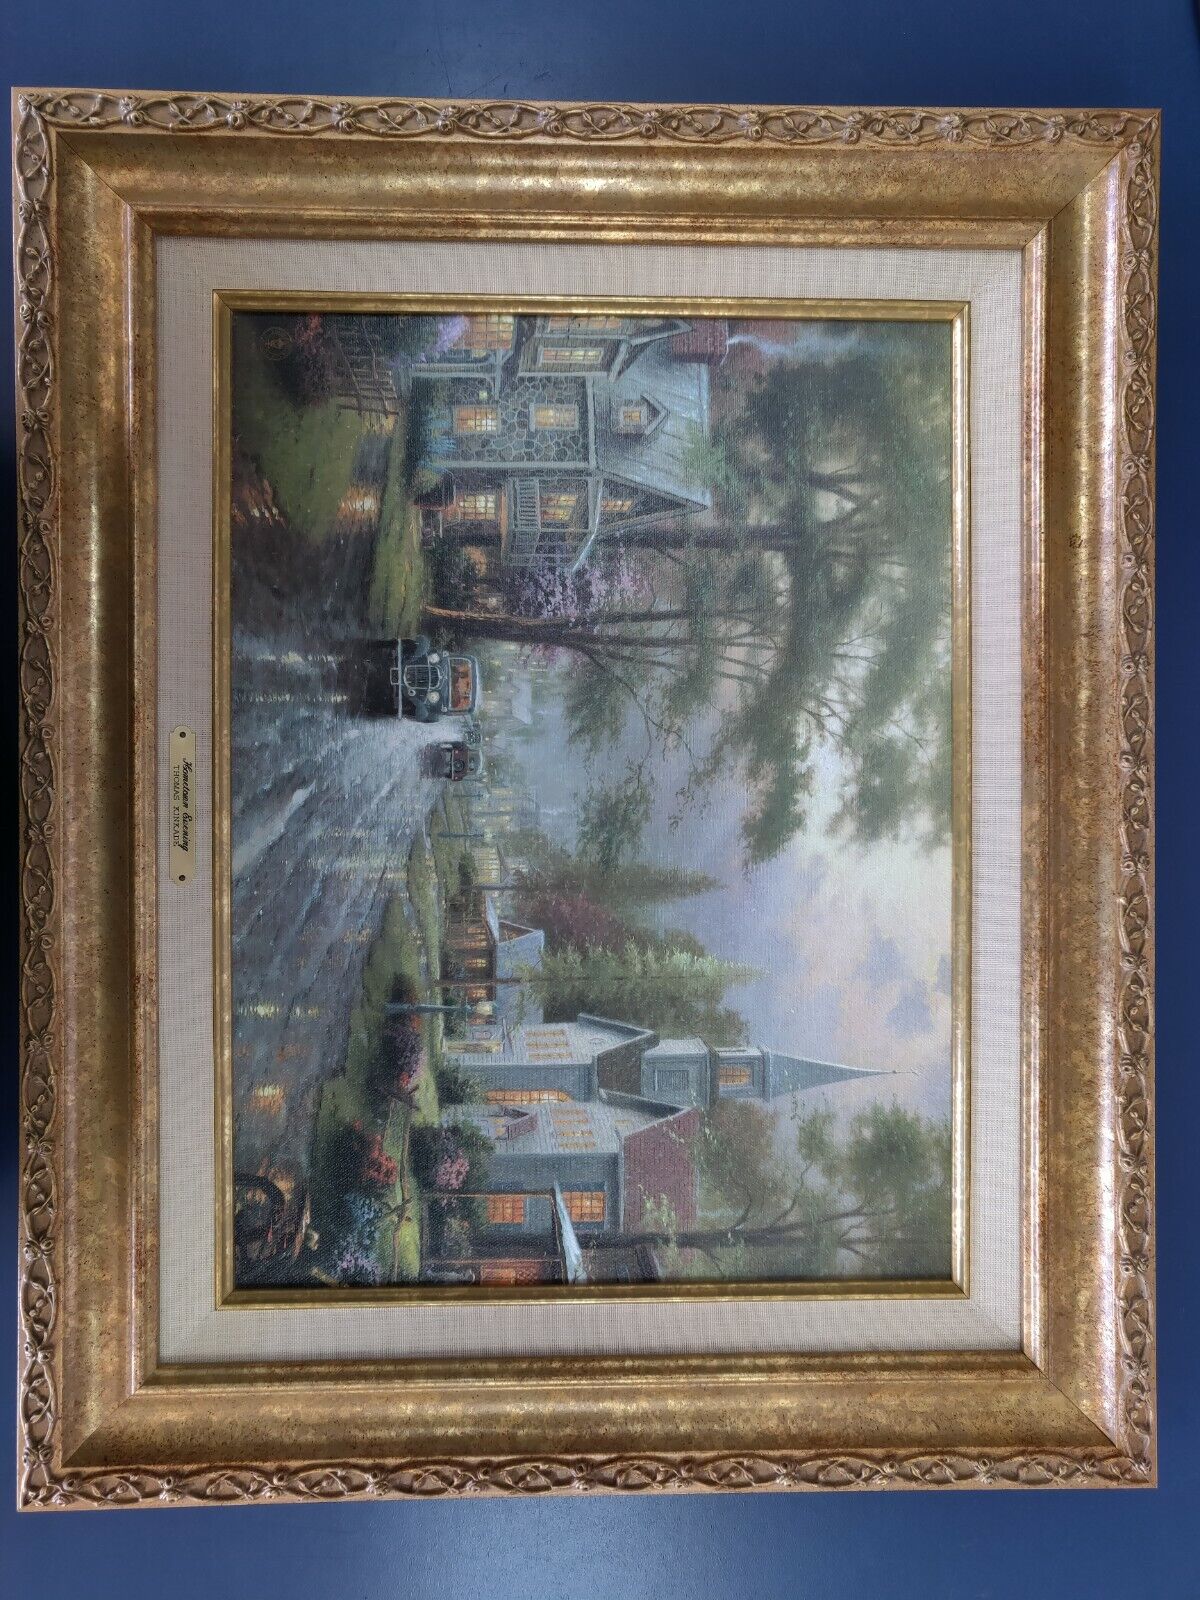 Thomas Kinkade Hometown Evening -First published as a limited edition lithograph